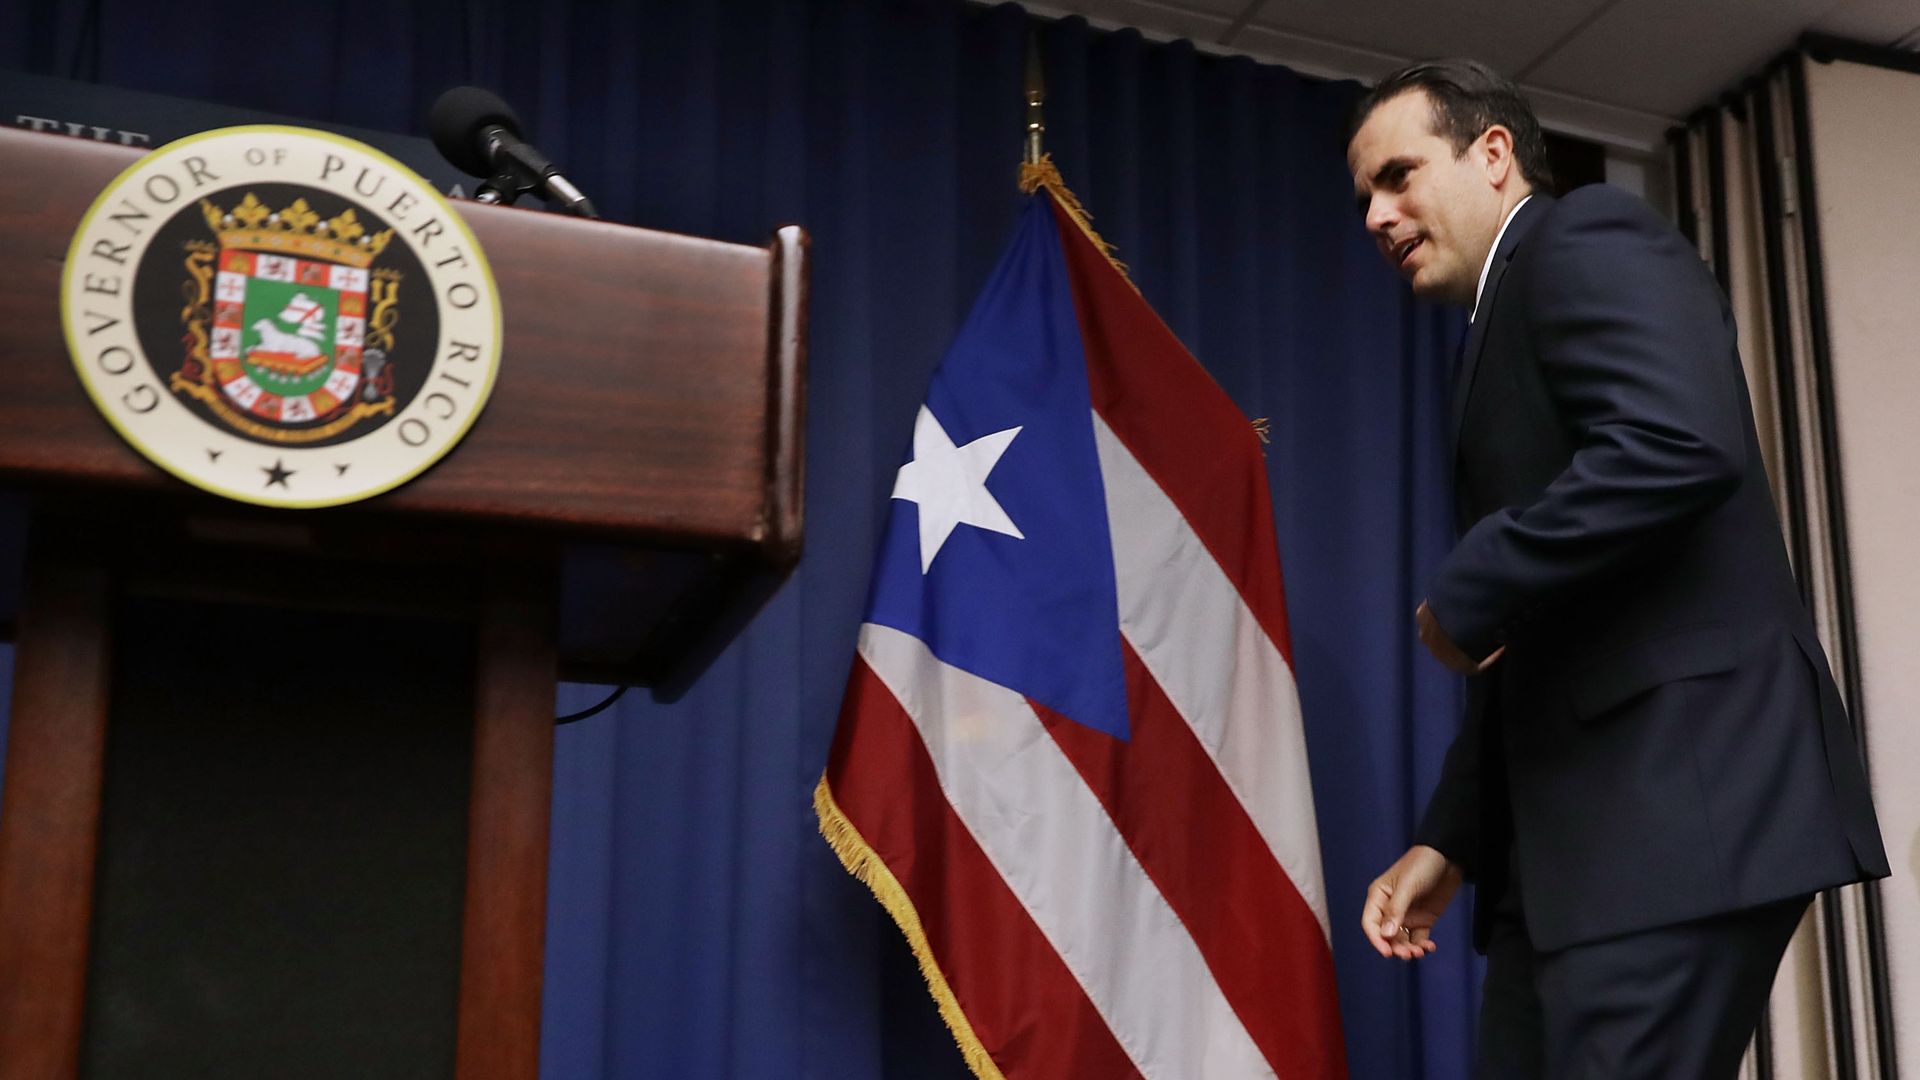 Puerto Rico Gov. Ricardo Rosselló walks up to a podium with the Puerto Rican flag behind him. 